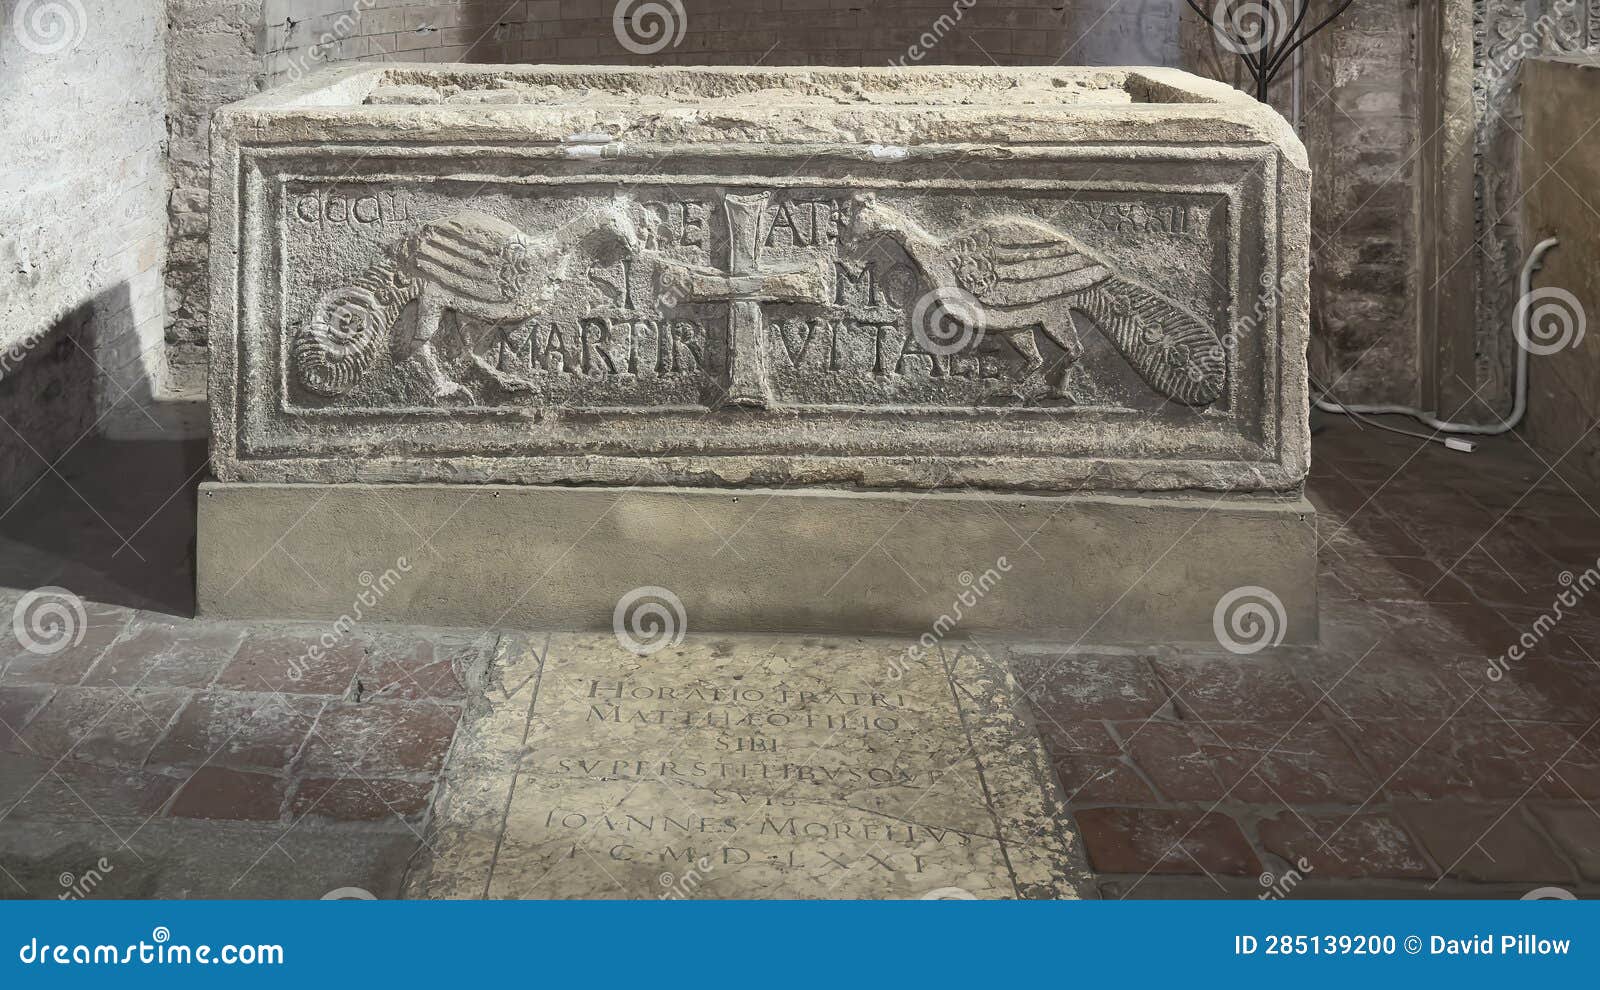 the sarcophagus of saint vitale in the church of the saints vitale and agricola in bologna, italy.